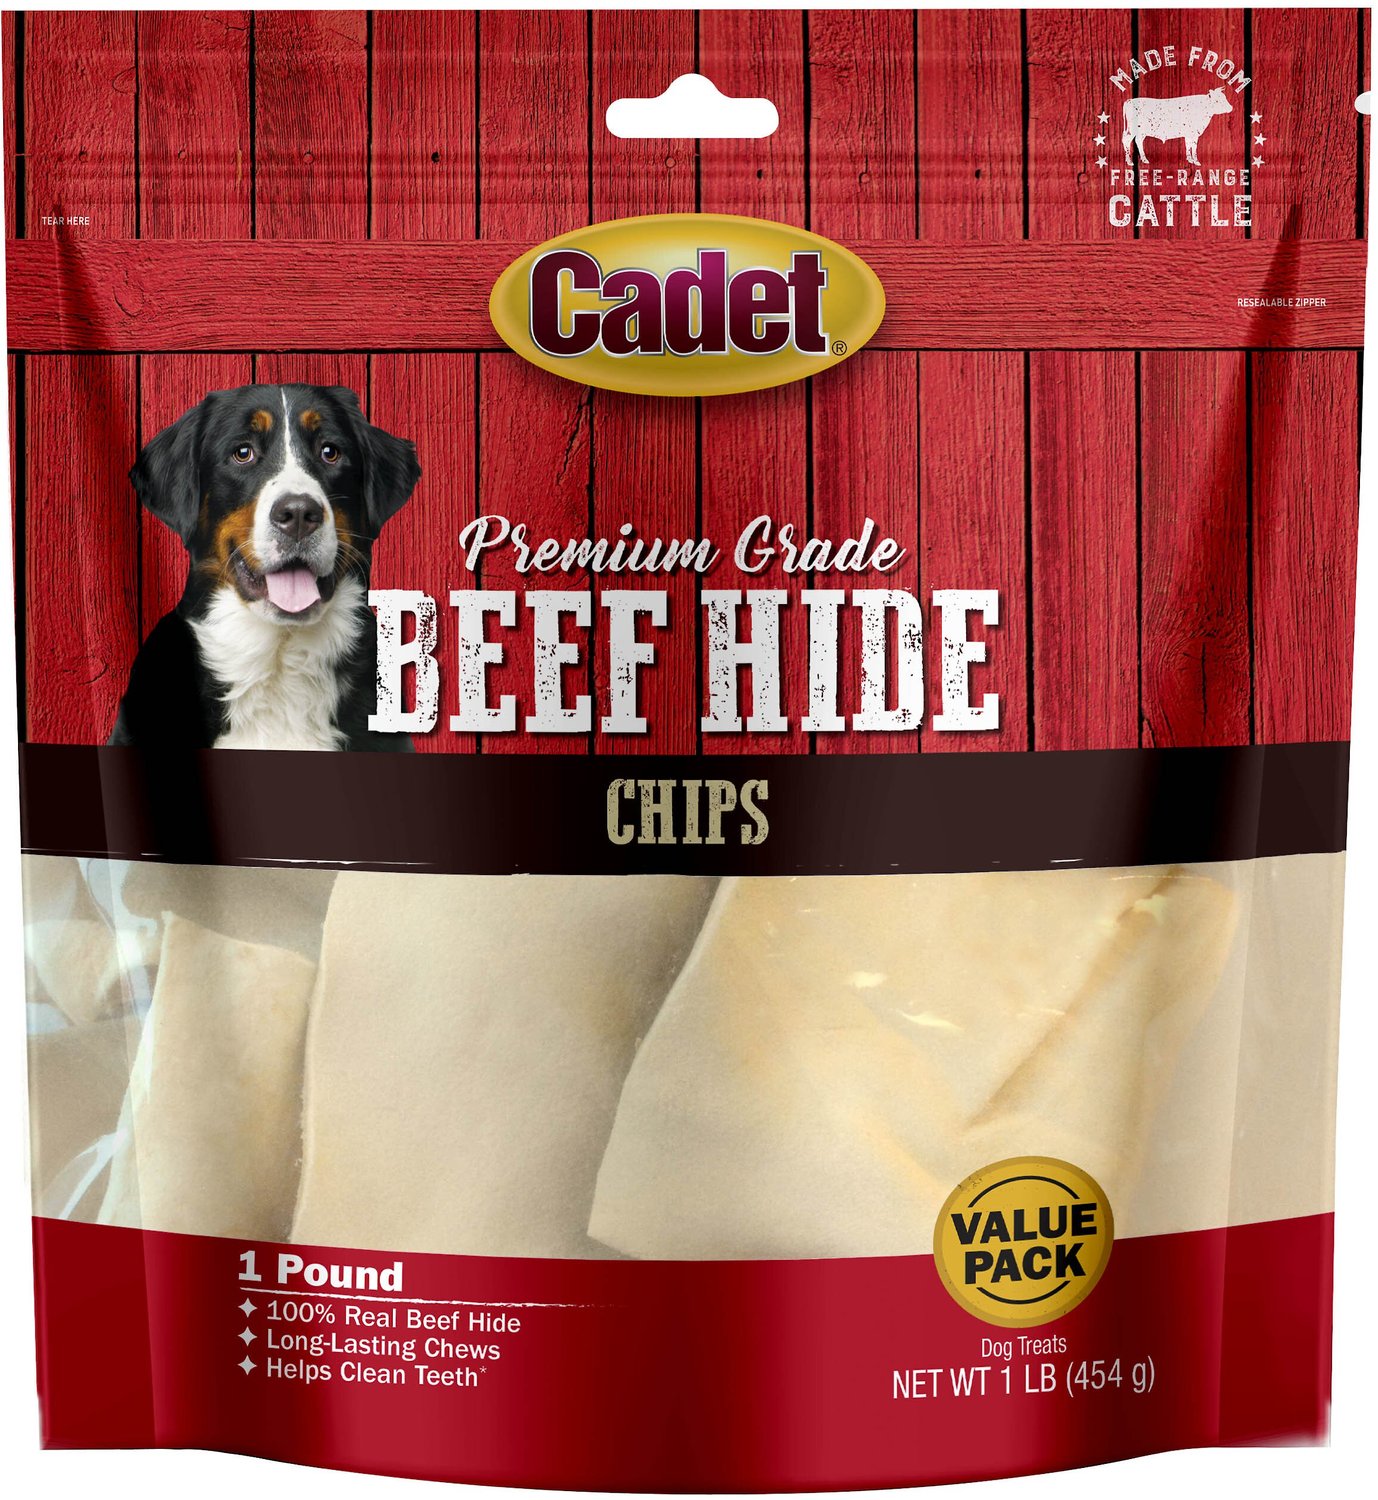 2 Packs 24 pieces total Large Cadet 12-Piece Cow Ears Meat for Dogs